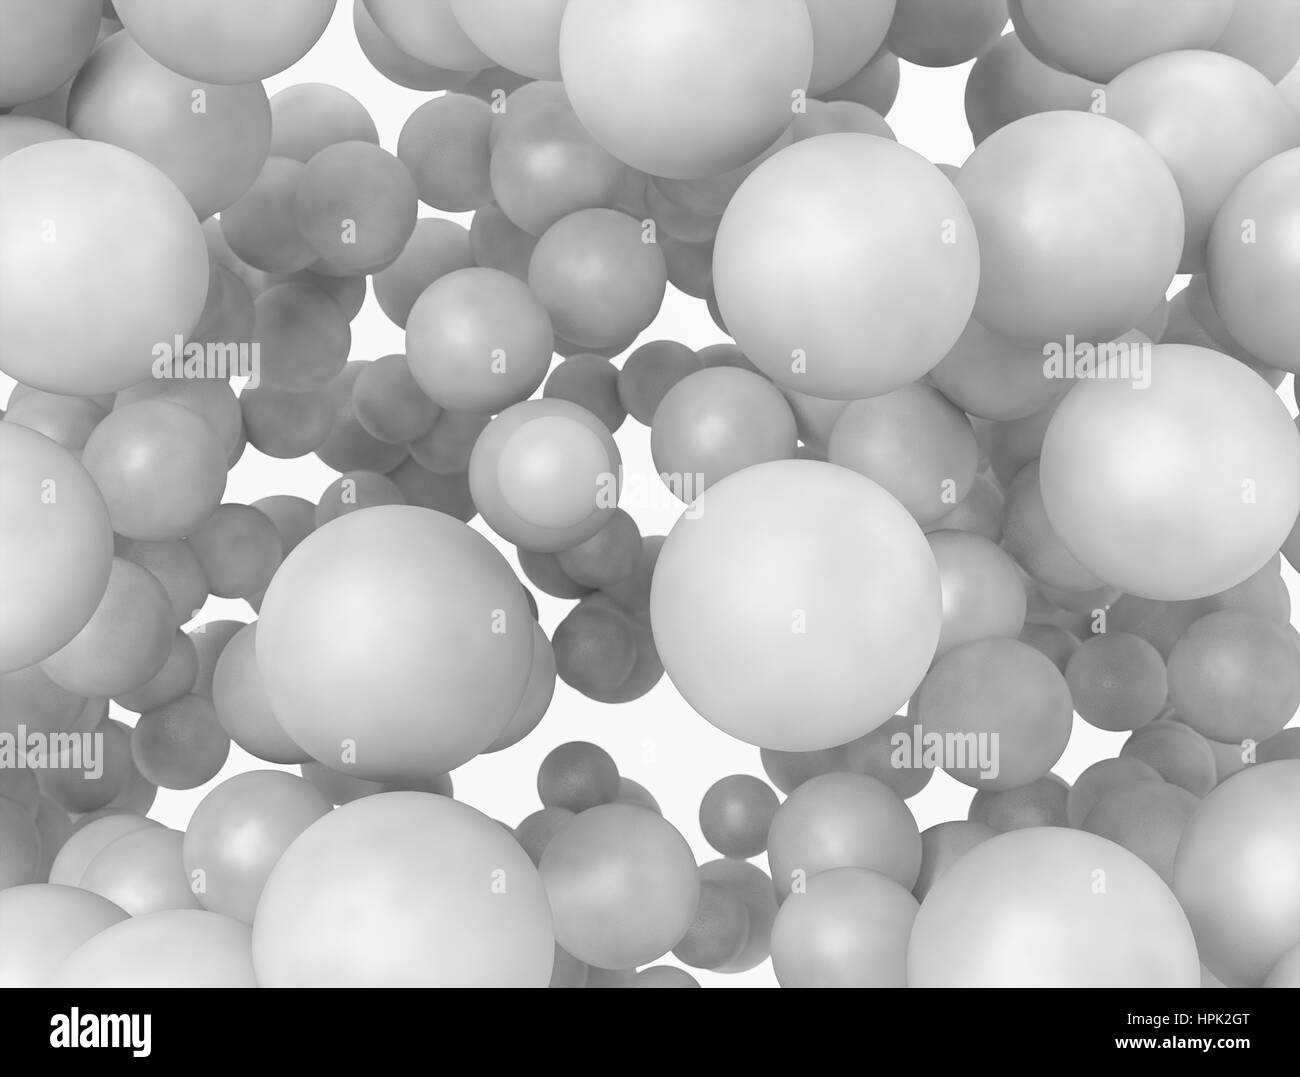 Abstract group of  spheres Stock Photo